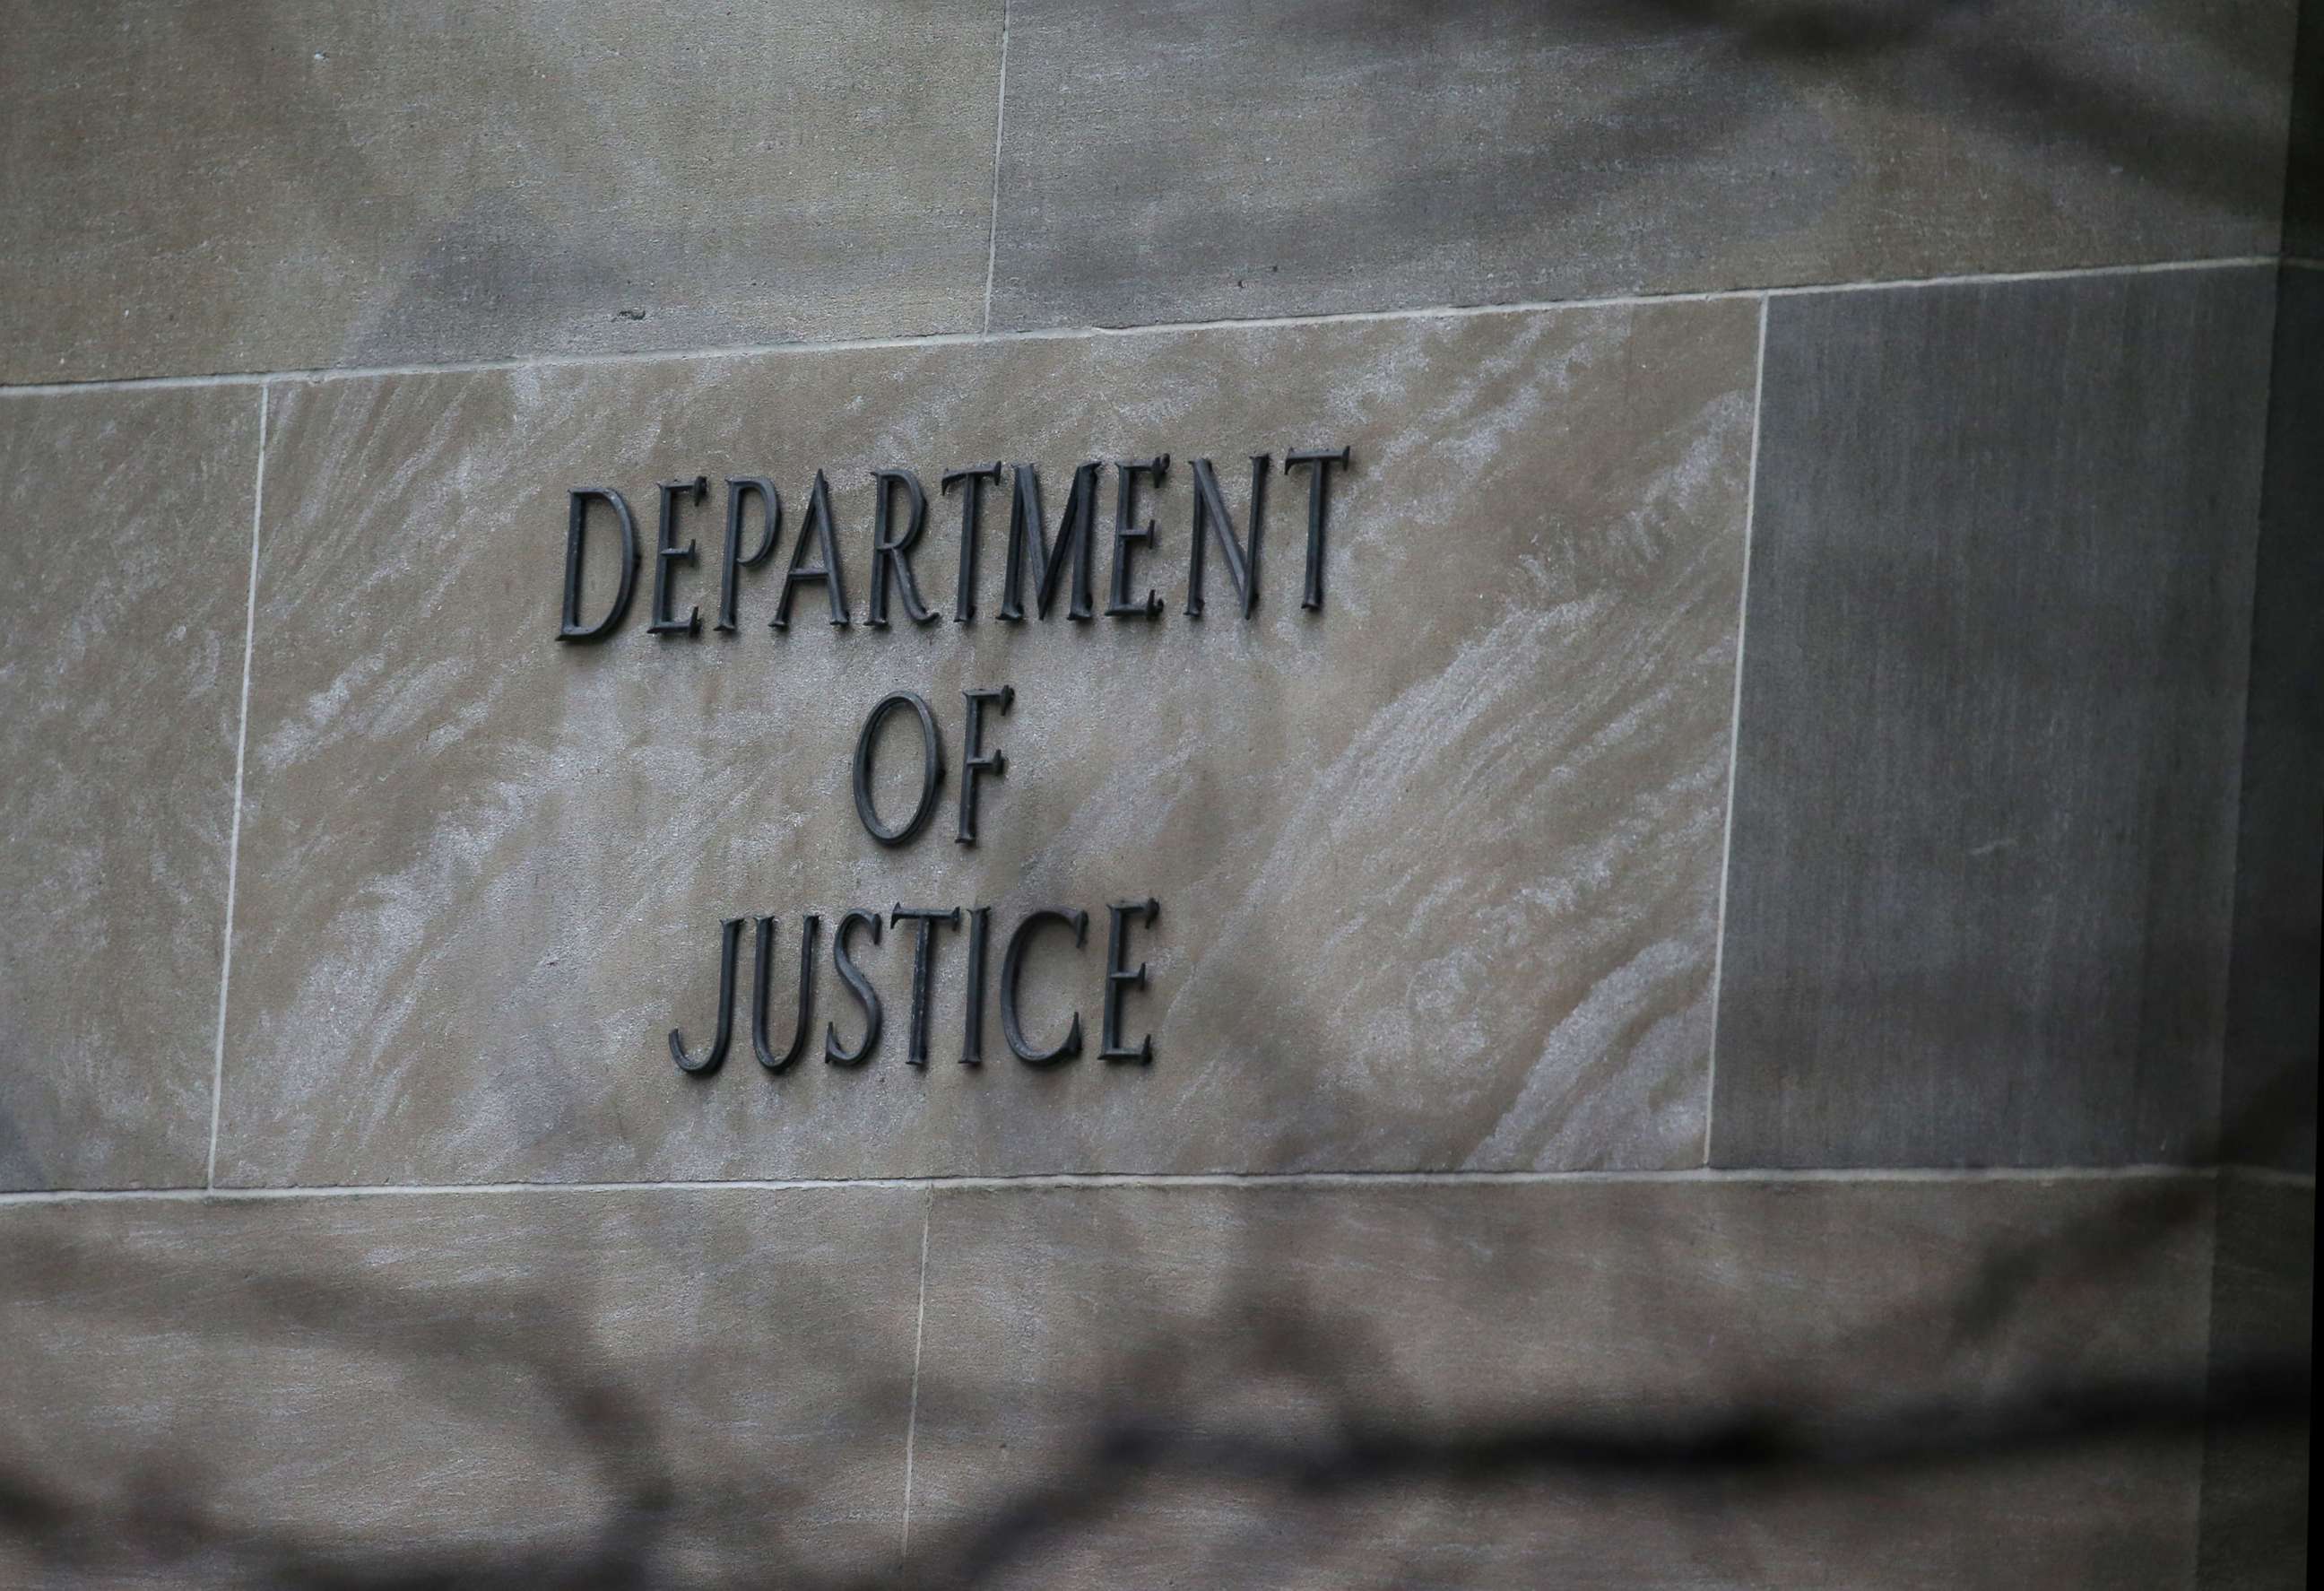 PHOTO: The Department of Justice building is pictured in Washington D.C., March 21, 2019.